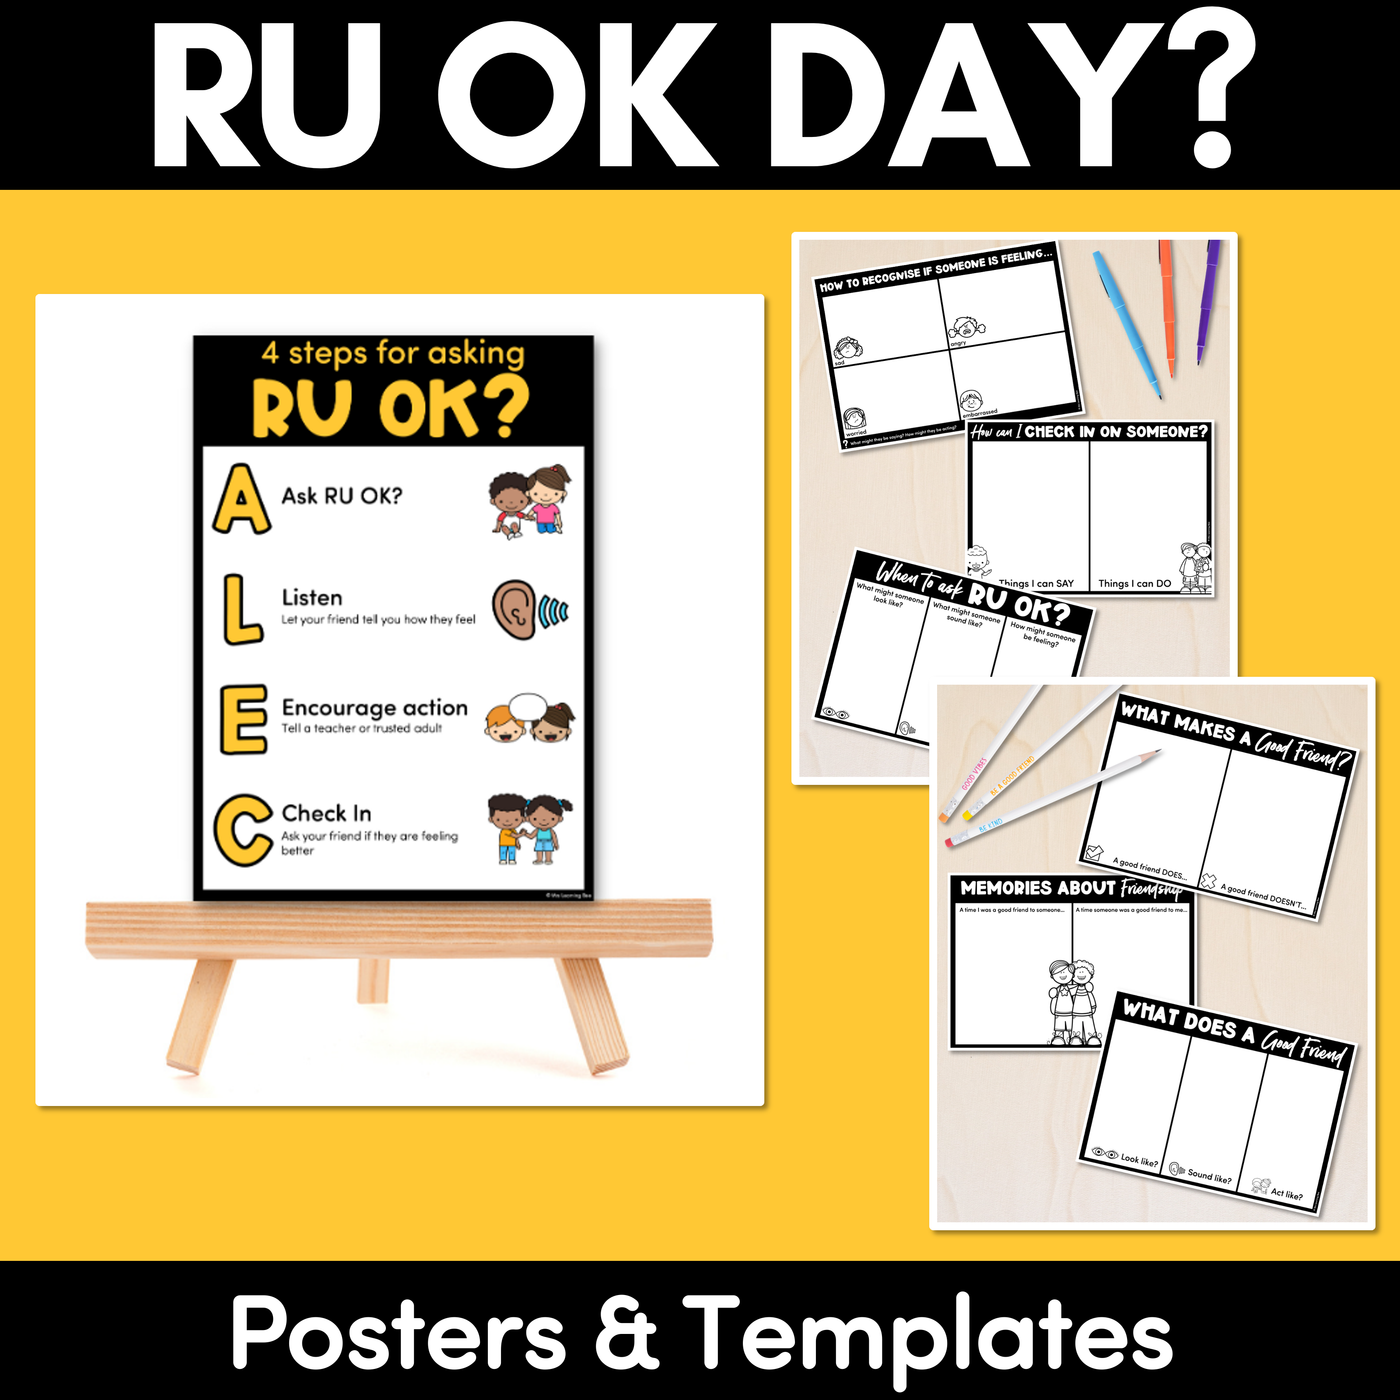 RU OK? Day Posters and Brainstorming Templates